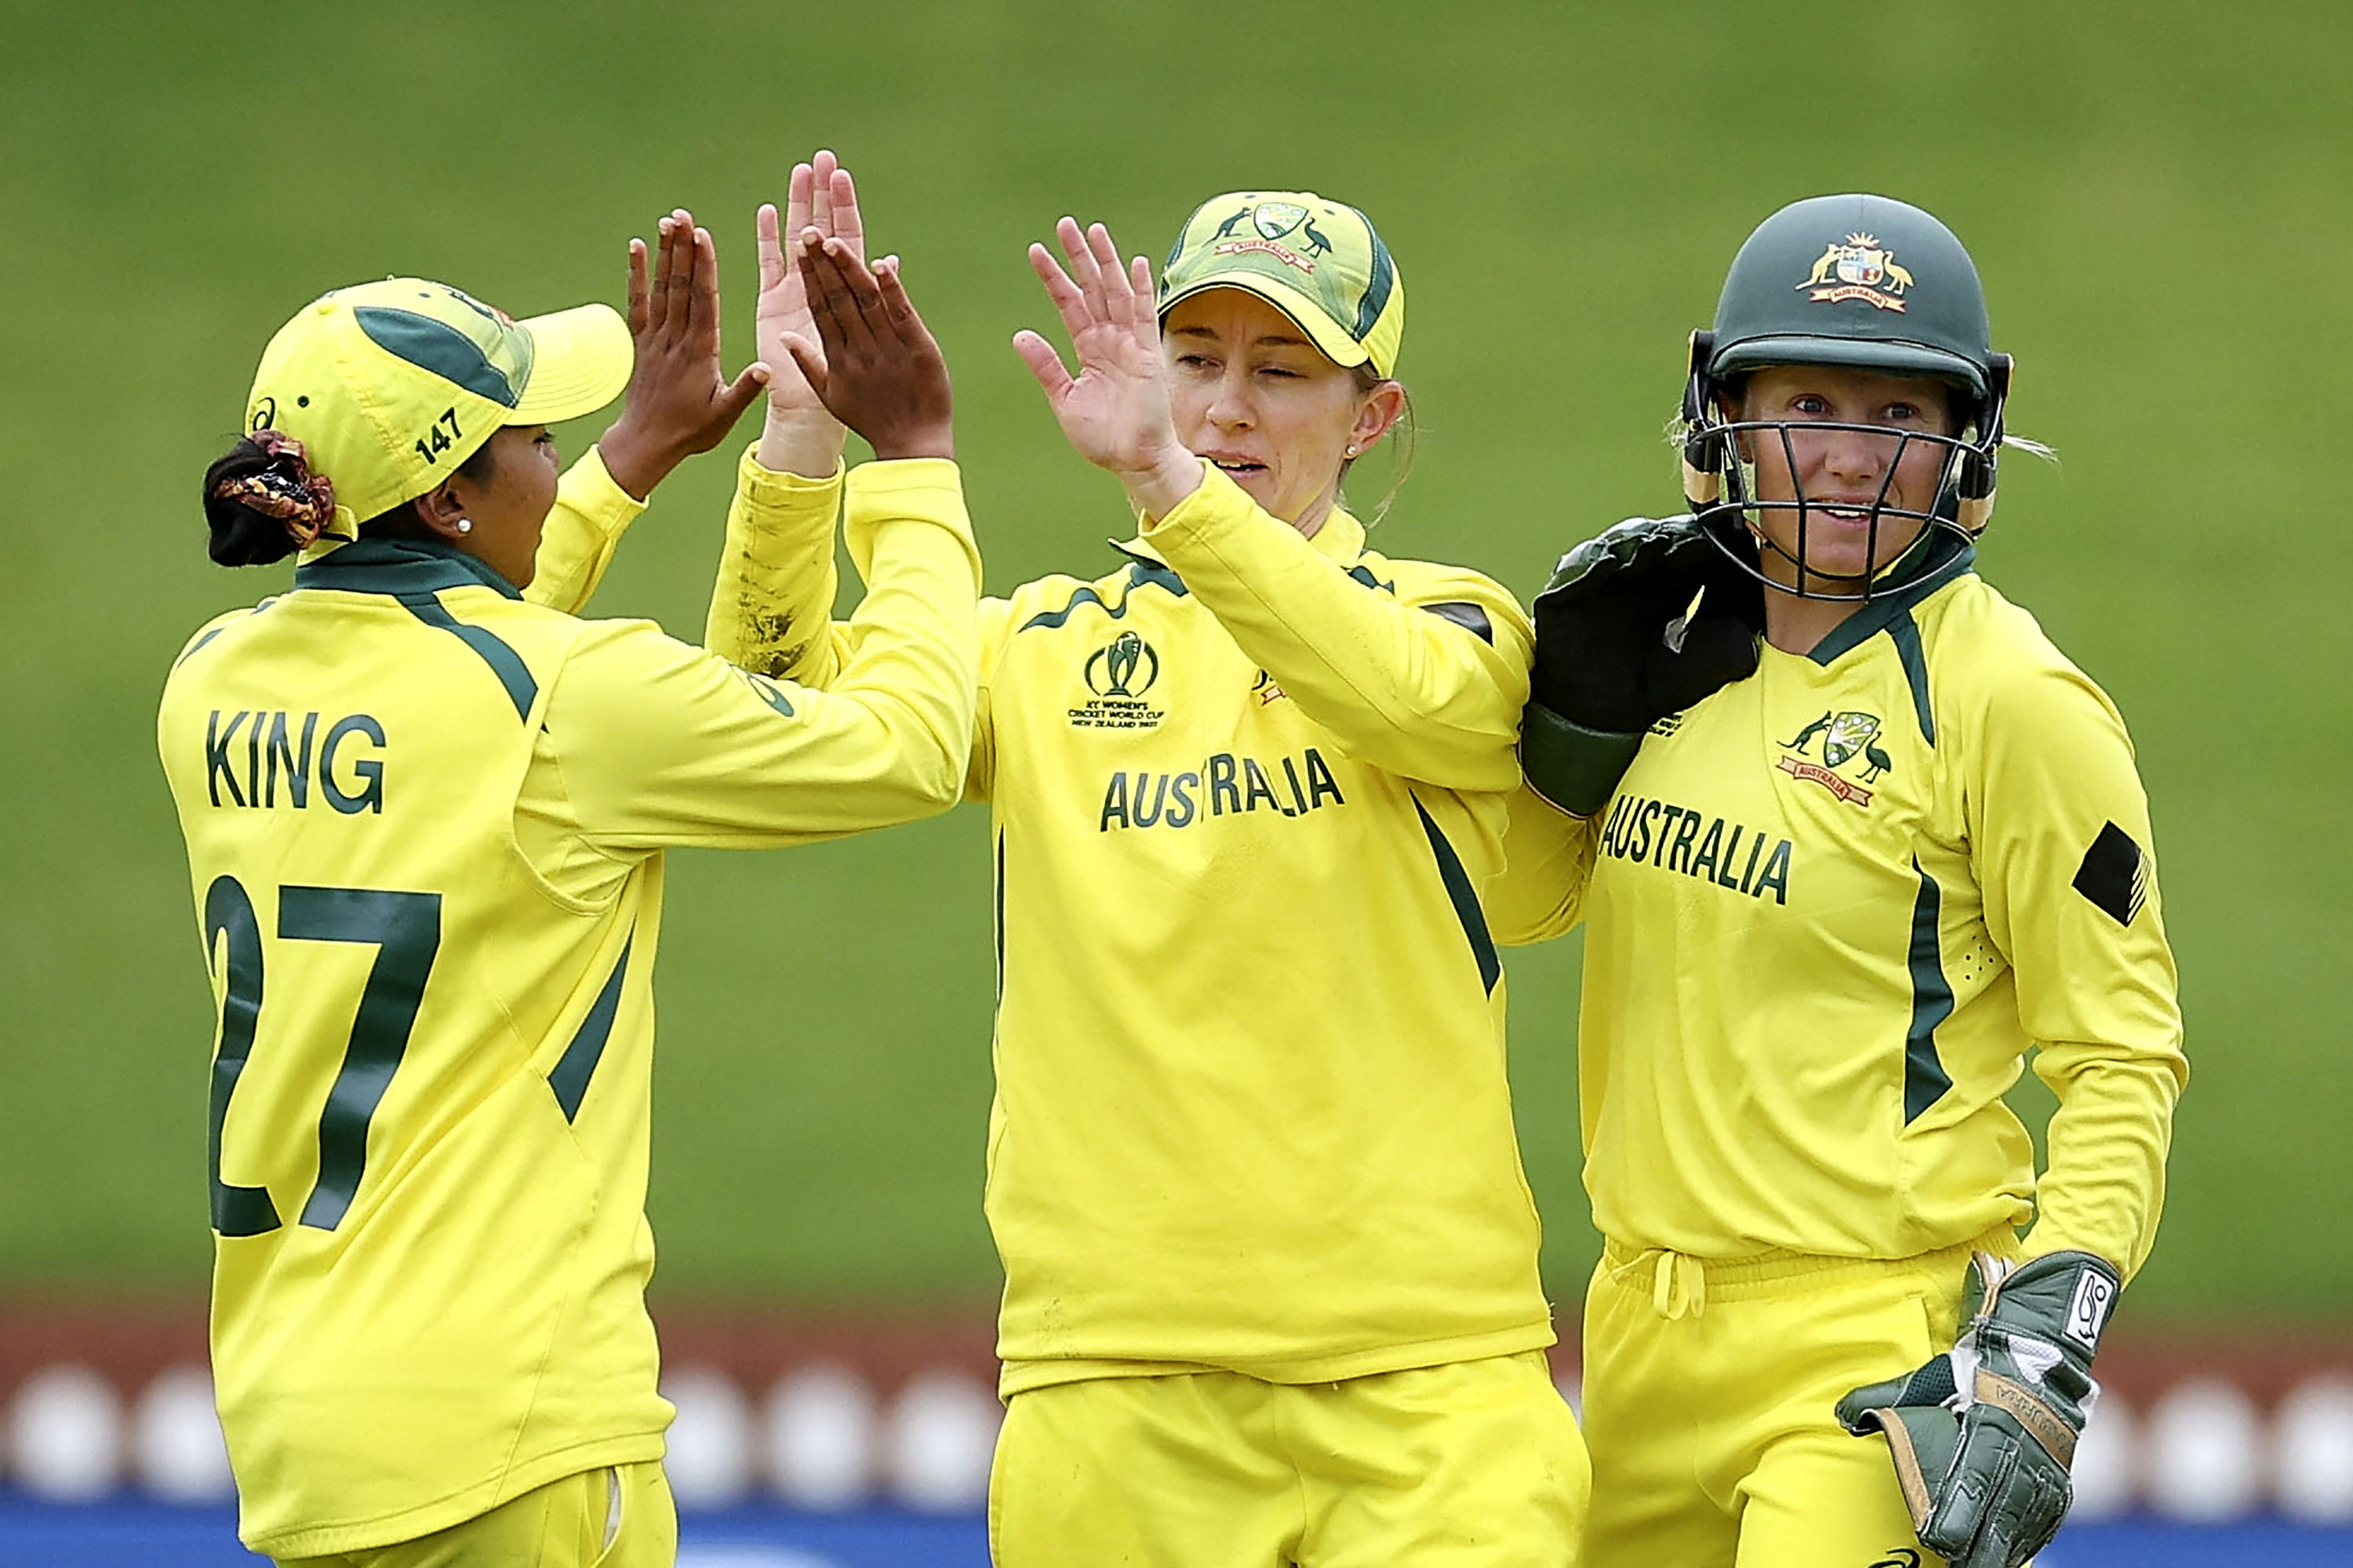 AUS-W vs WI-W Dream11 Prediction: Australia women vs West Indies women 2022 Dream11 Team Picks, Probable Playing XI, Pitch Report and match overview, AUS-W vs WI-W Live on Wednesday at 30 Mar on InsideSport